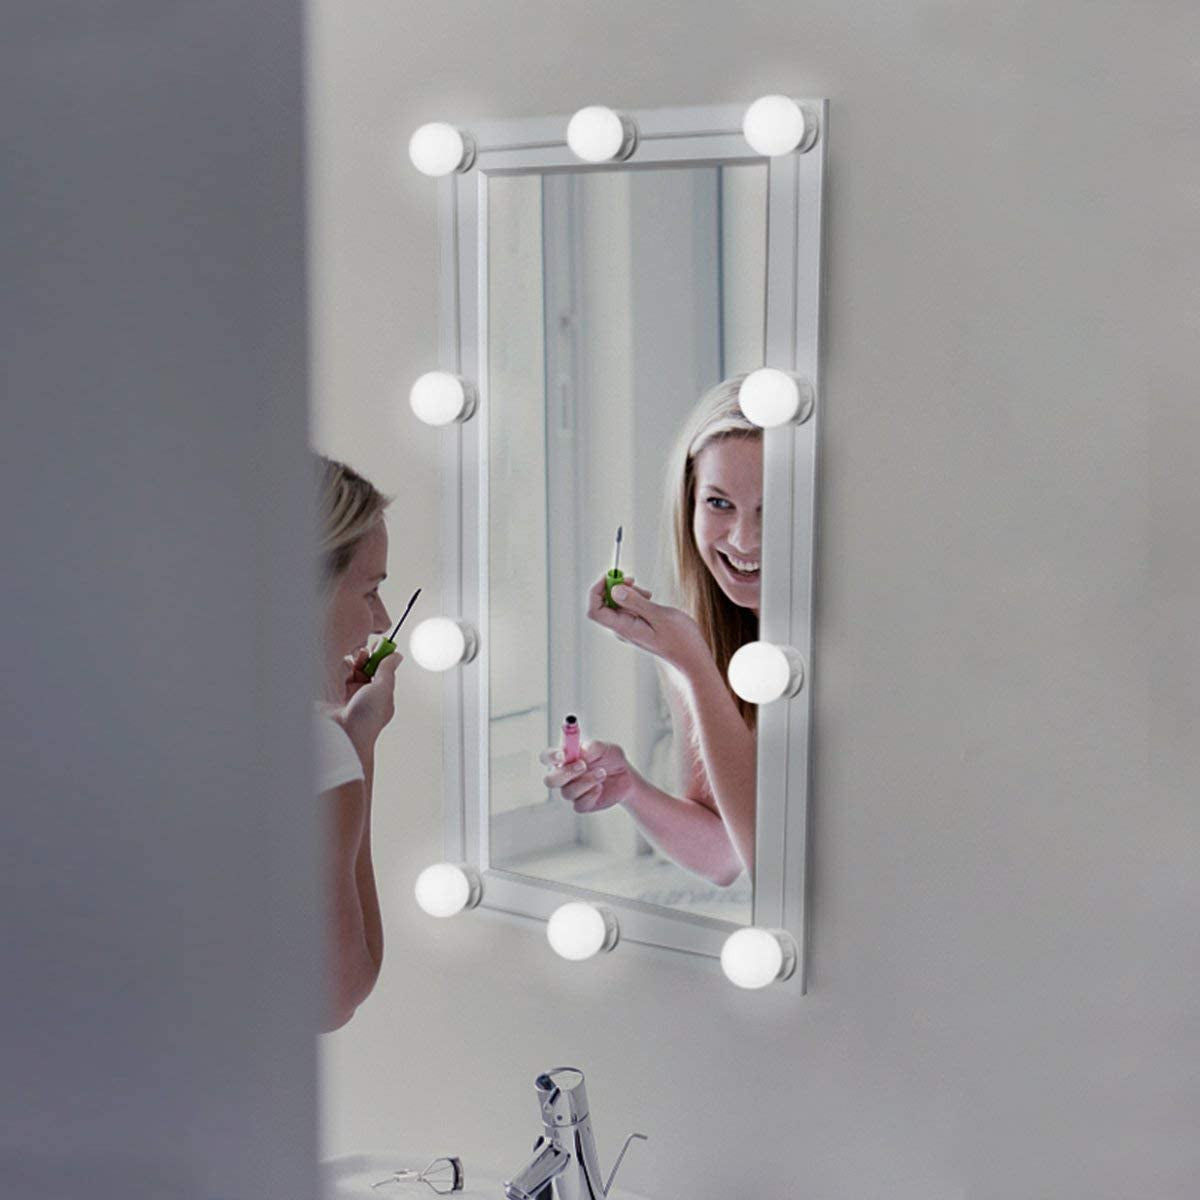 Vanity Mirror Lights Kits Hollywood Style LED Makeup Lights with 10 Dimmable Bulbs for Makeup Dressing Table with 5-Level Adjustable Brightness Touch Dimmer